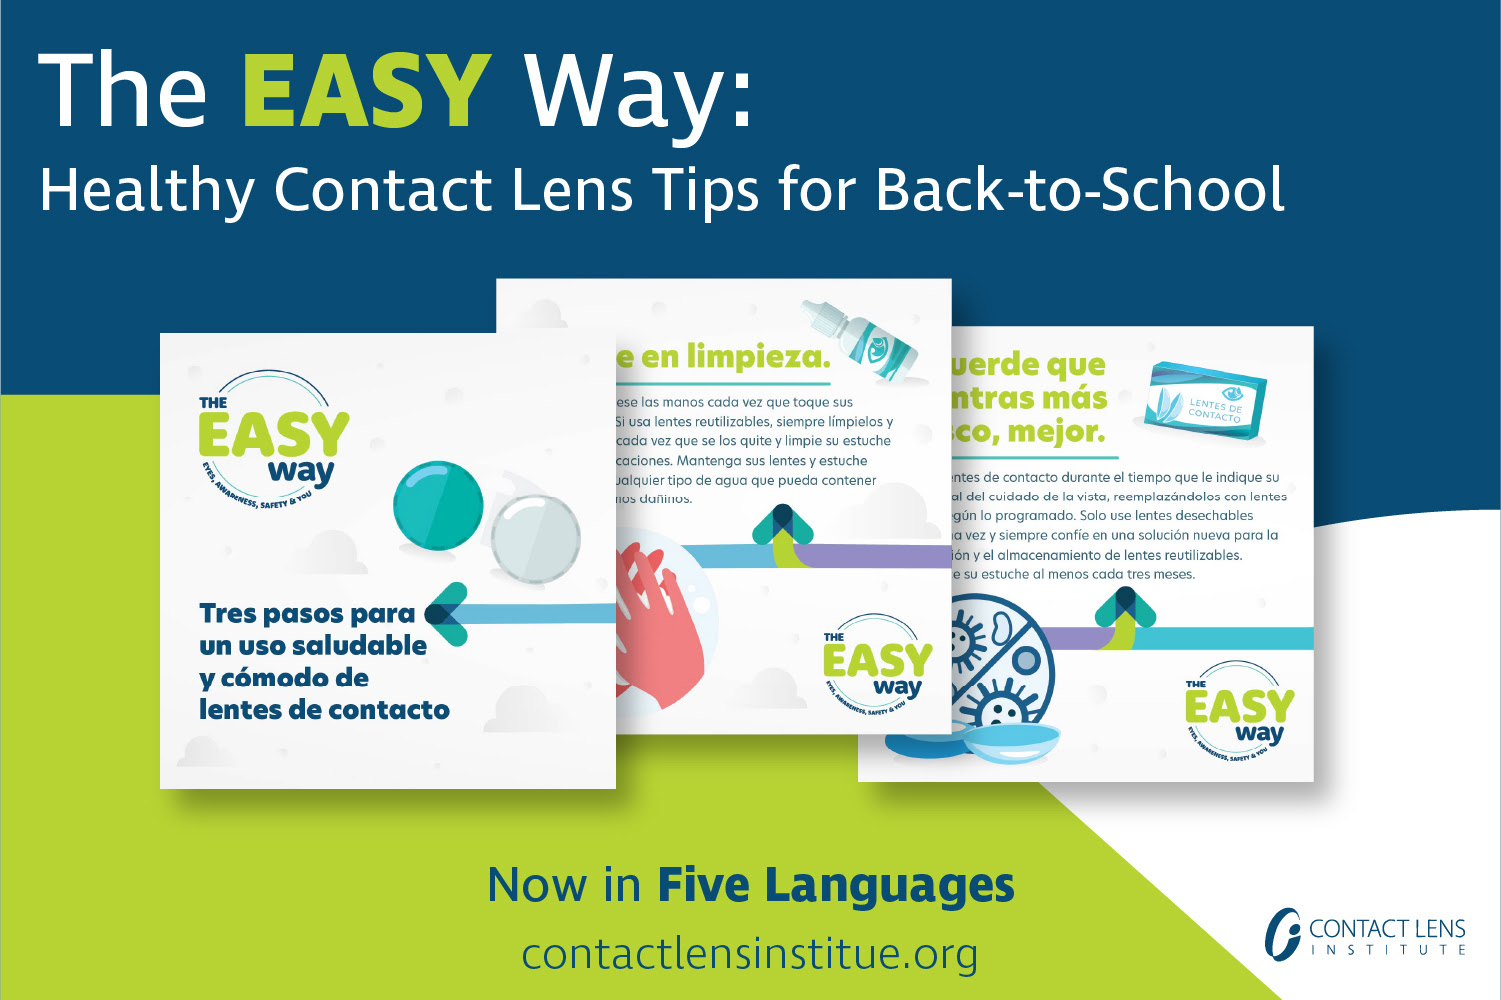 Contact Lens Institute Adds Eeasy Way Translations in Five Languages